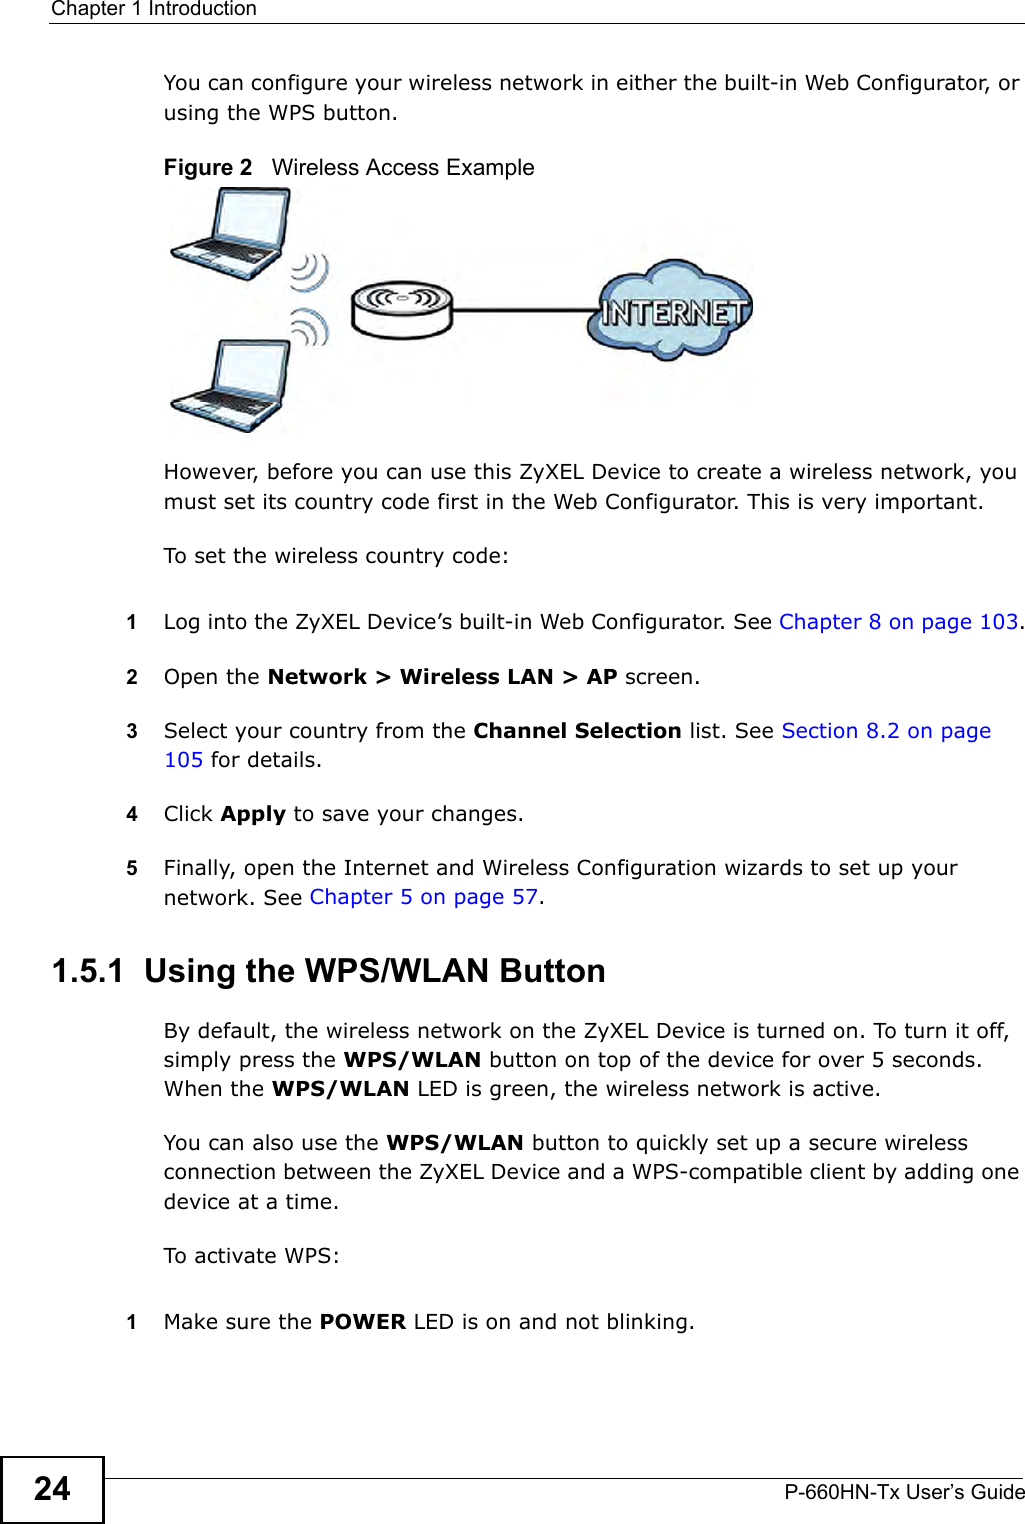 Chapter 1 IntroductionP-660HN-Tx User’s Guide24You can configure your wireless network in either the built-in Web Configurator, or using the WPS button.Figure 2   Wireless Access ExampleHowever, before you can use this ZyXEL Device to create a wireless network, you must set its country code first in the Web Configurator. This is very important.To set the wireless country code:1Log into the ZyXEL Device’s built-in Web Configurator. See Chapter 8 on page 103.2Open the Network &gt; Wireless LAN &gt; AP screen.3Select your country from the Channel Selection list. See Section 8.2 on page 105 for details.4Click Apply to save your changes.5Finally, open the Internet and Wireless Configuration wizards to set up your network. See Chapter 5 on page 57.1.5.1  Using the WPS/WLAN ButtonBy default, the wireless network on the ZyXEL Device is turned on. To turn it off, simply press the WPS/WLAN button on top of the device for over 5 seconds. When the WPS/WLAN LED is green, the wireless network is active.You can also use the WPS/WLAN button to quickly set up a secure wireless connection between the ZyXEL Device and a WPS-compatible client by adding one device at a time.To activate WPS:1Make sure the POWER LED is on and not blinking.